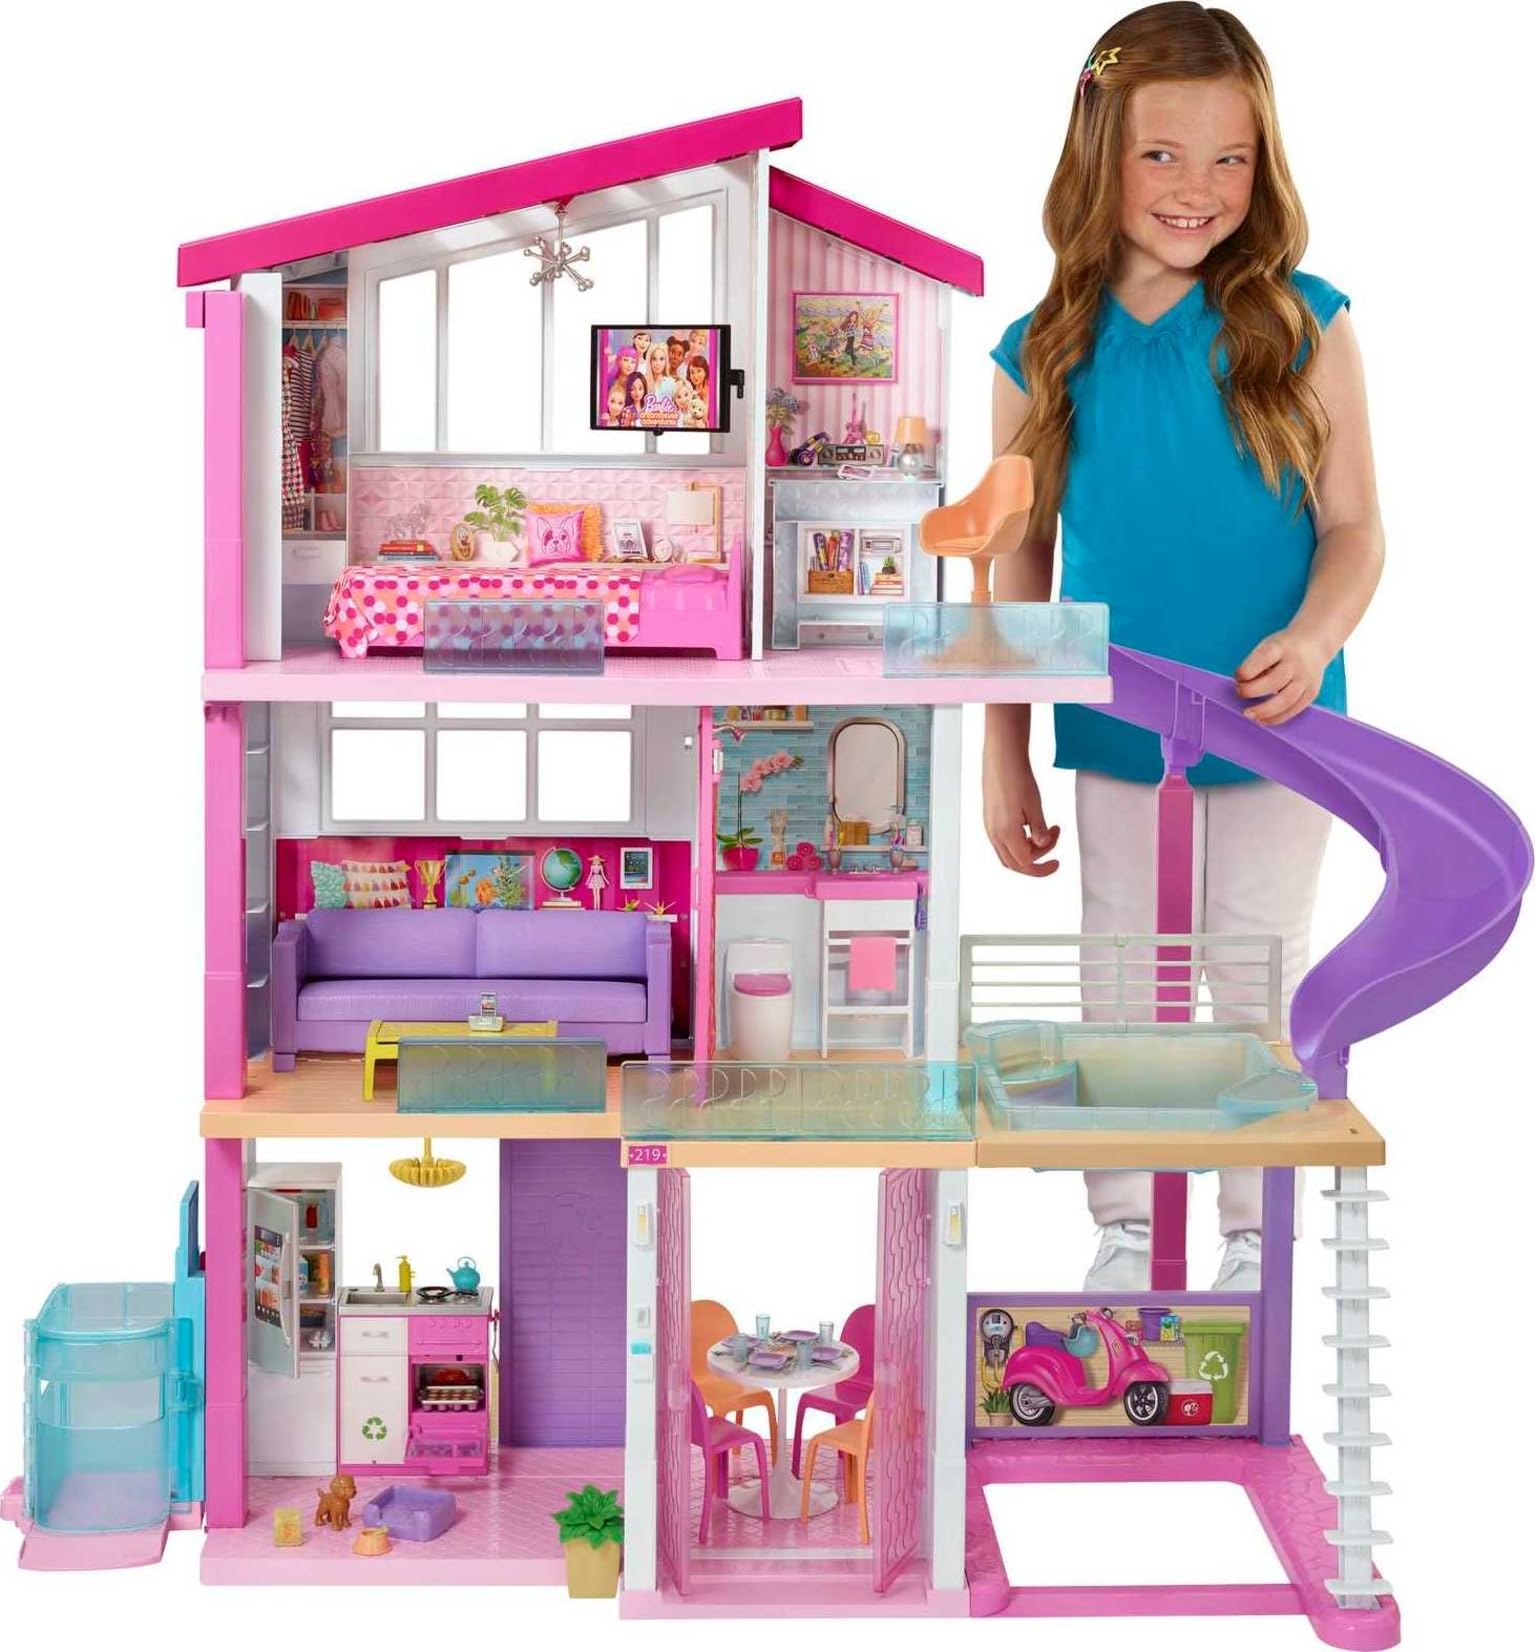 Barbie DreamHouse Dollhouse with 70+ Accessories, Working Elevator & Slide, Transforming Furniture, Lights & Sounds (Amazon Exclusive)